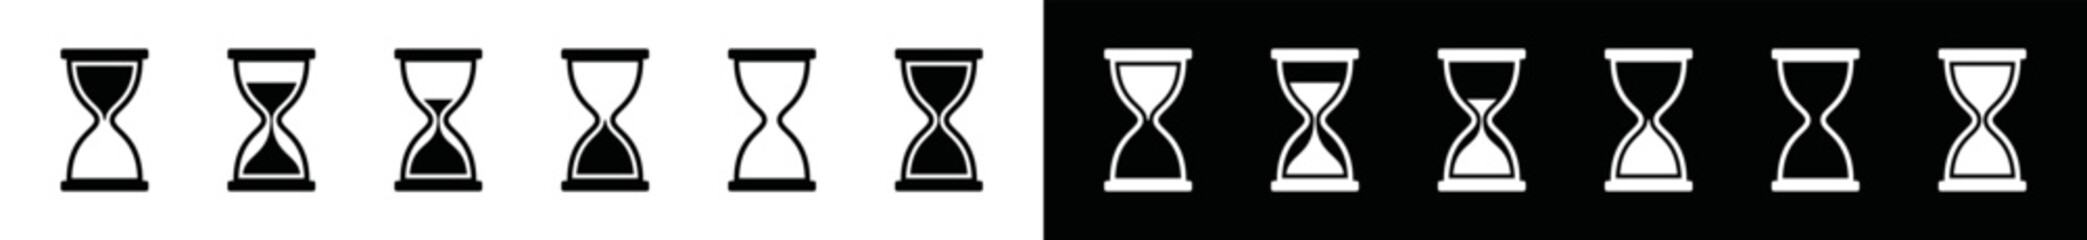 Hourglass icon set. Sand clock sign symbol. Hourglass stopwatch timer vector illustration. Reload hourglass timer icon vector.